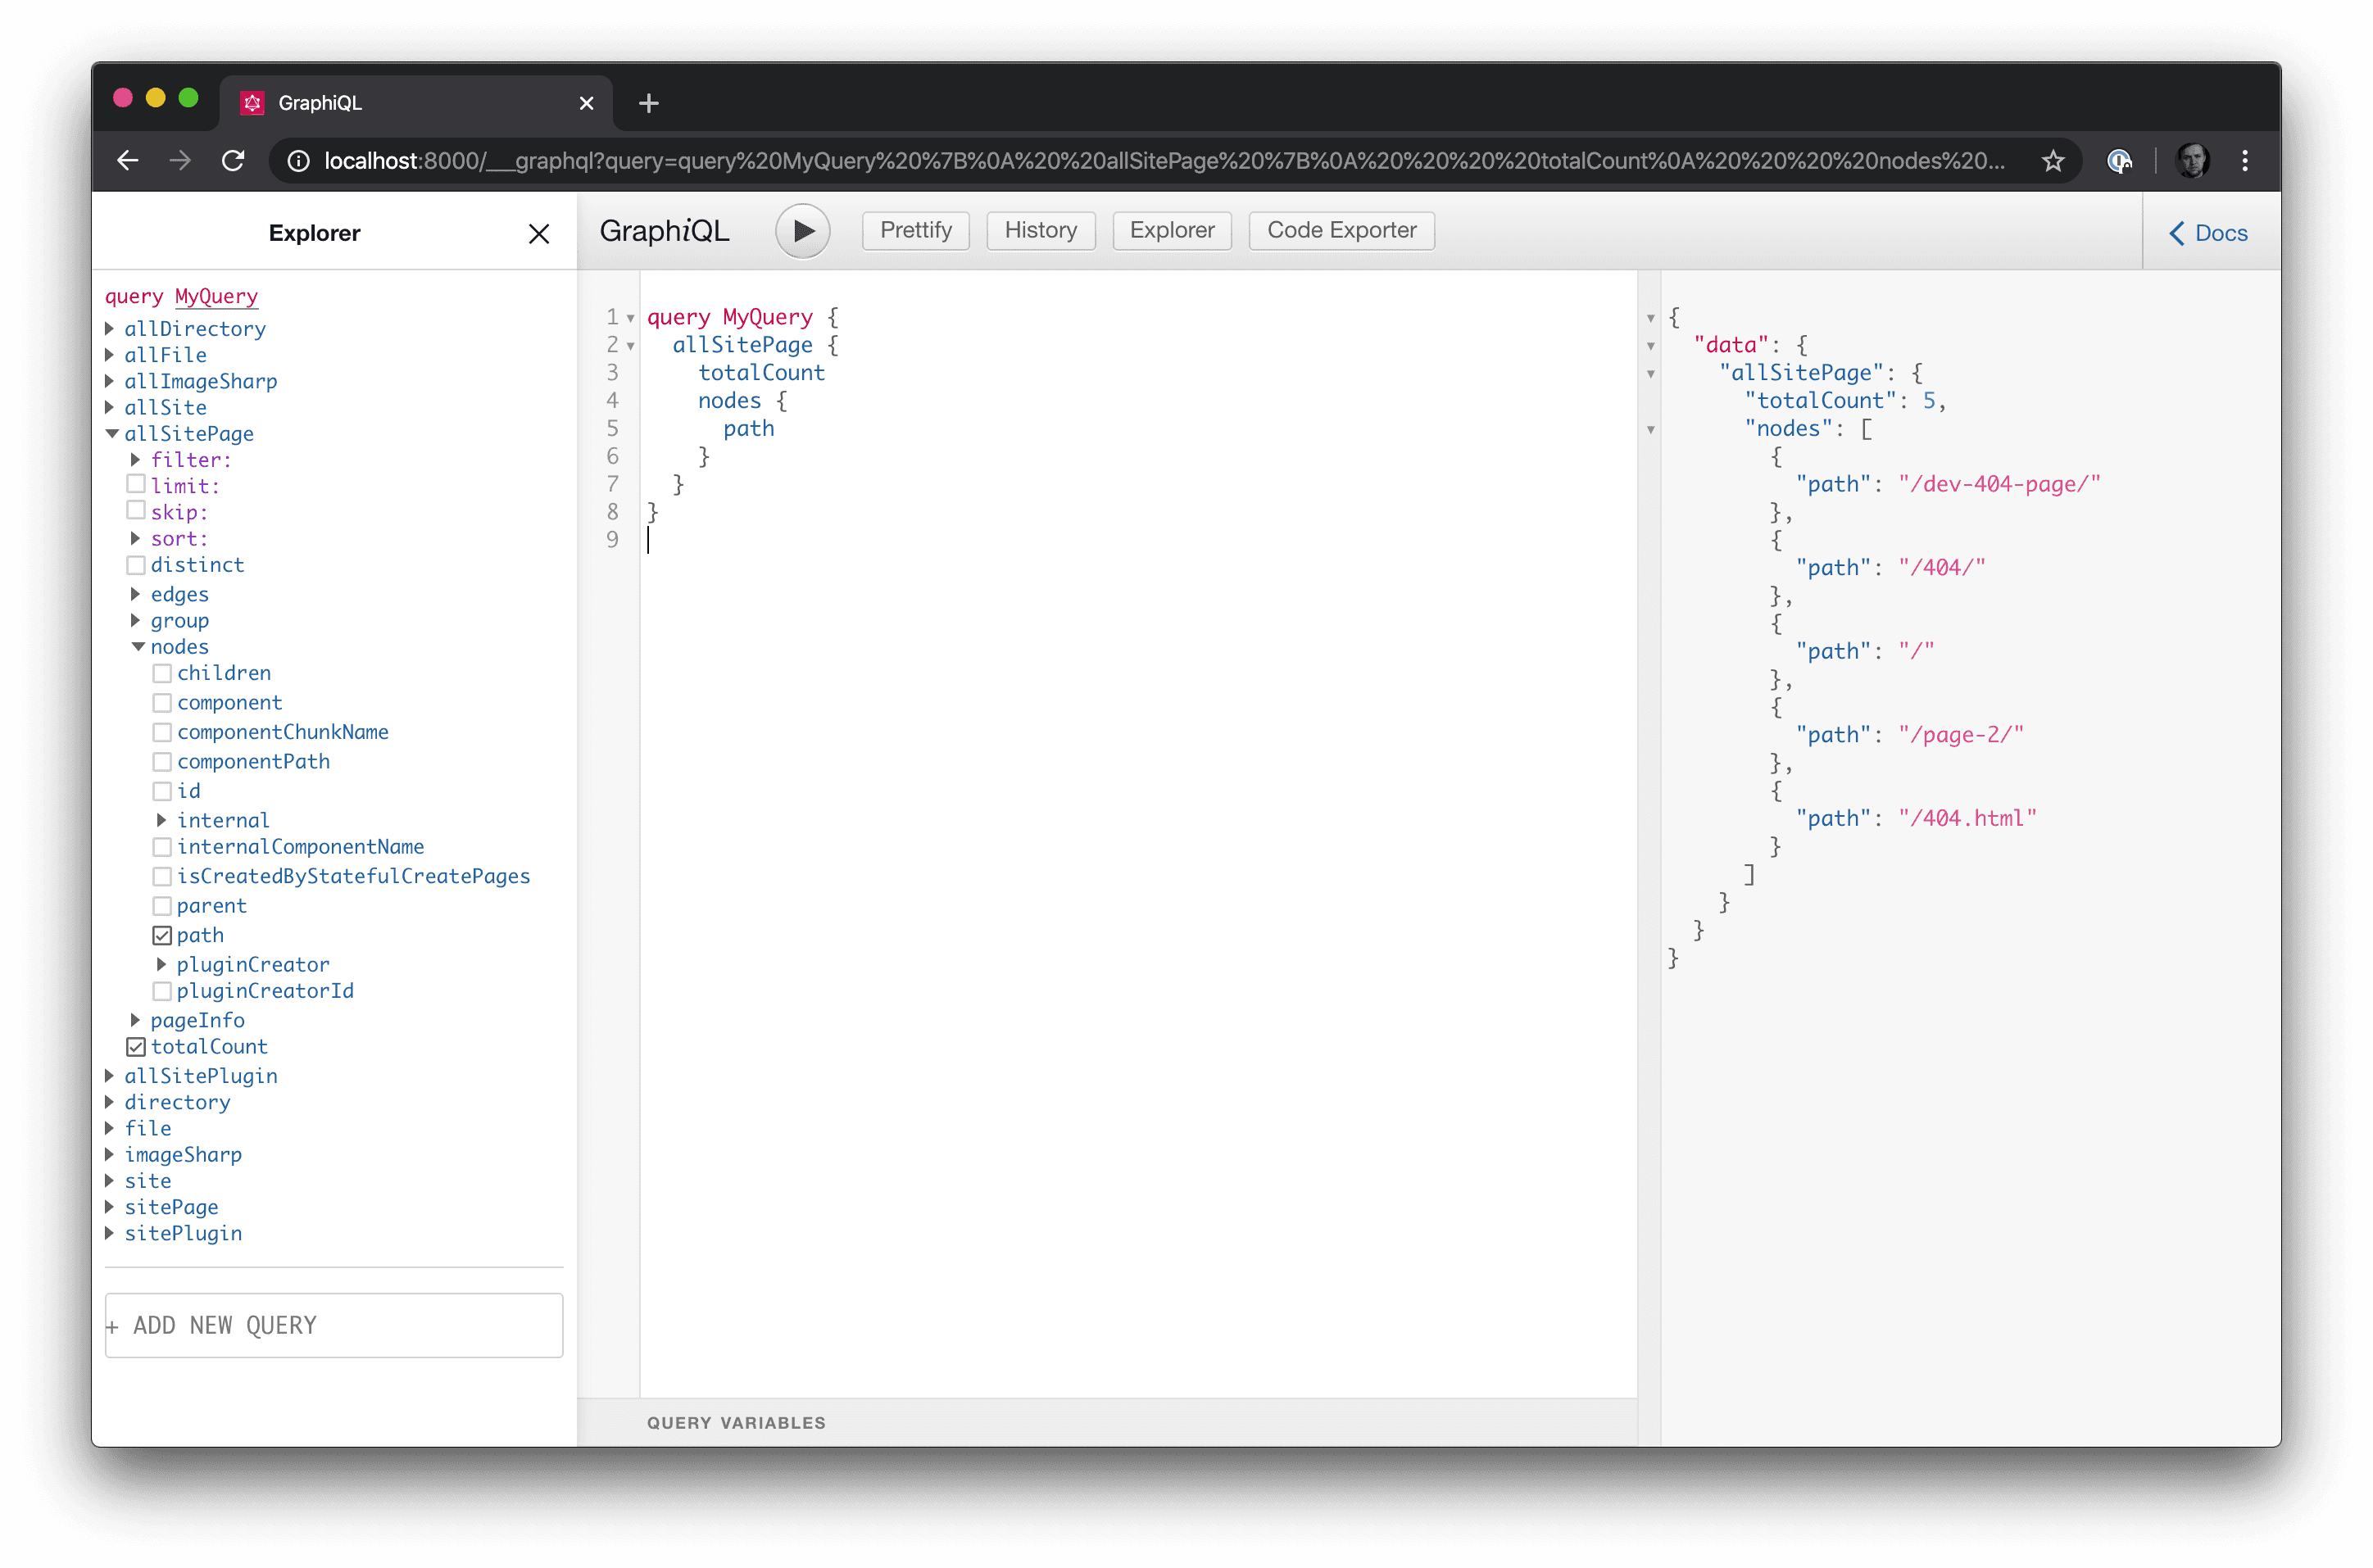 GraphiQL Results with Paths